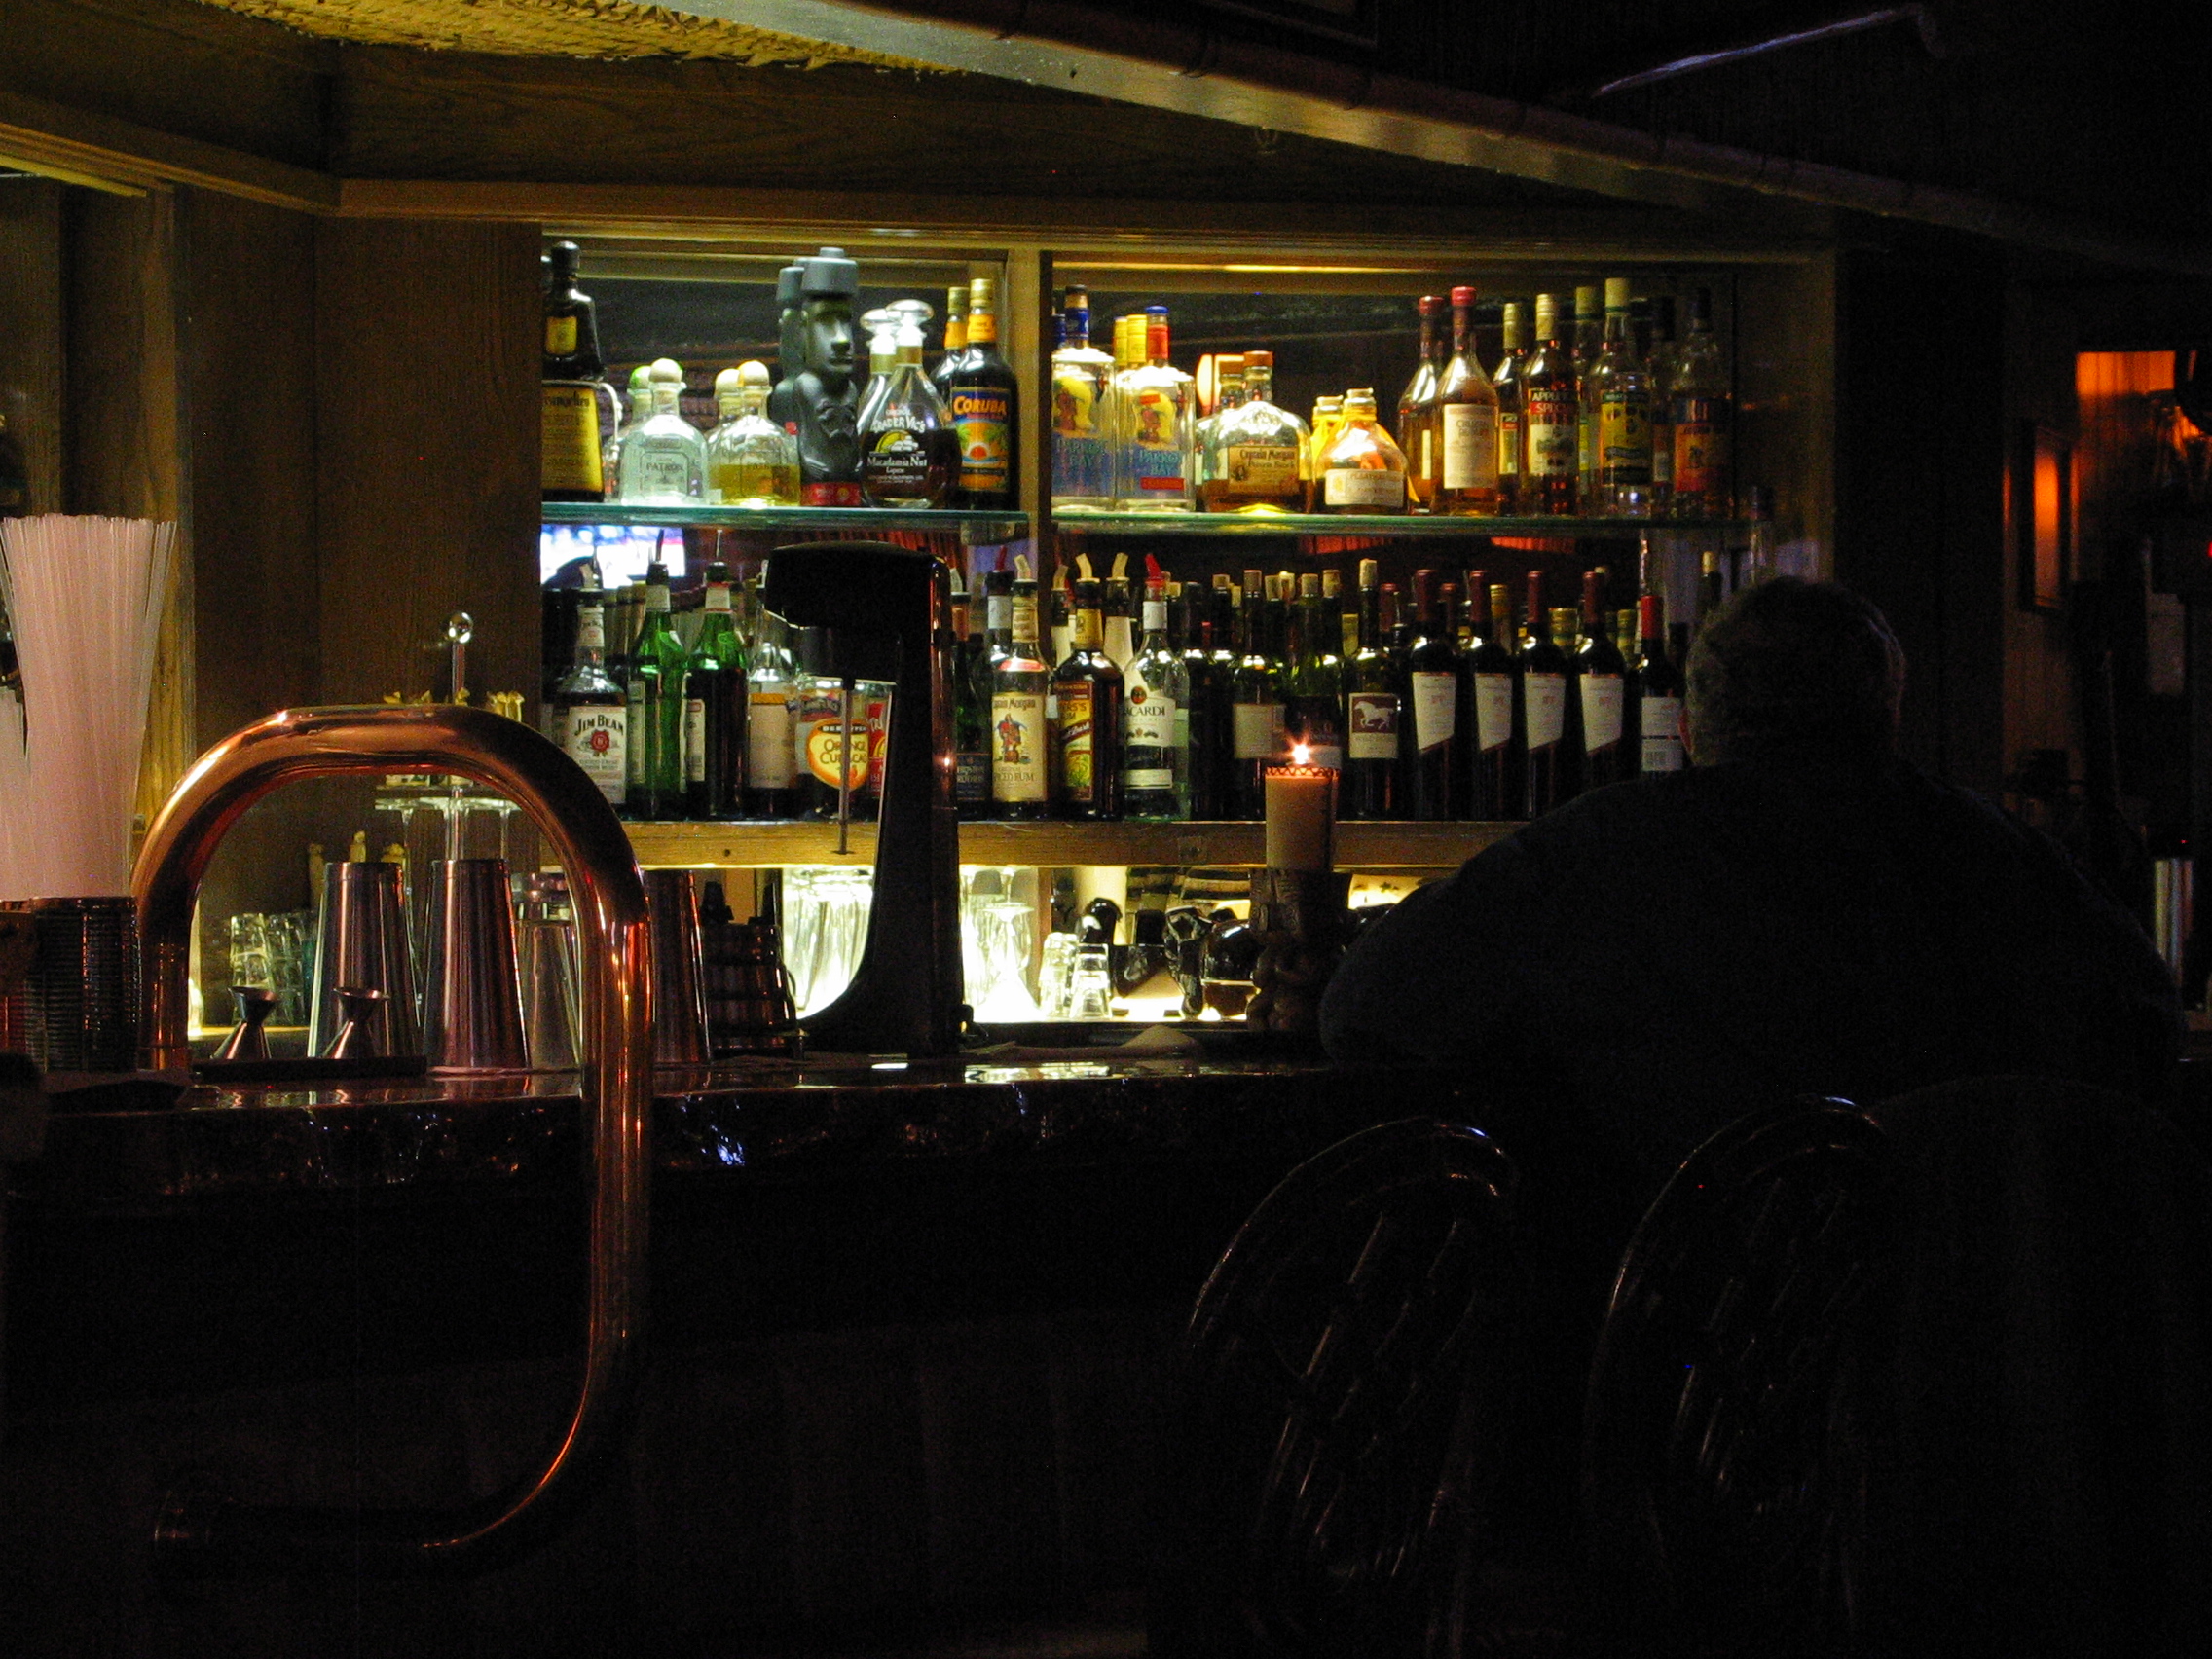 Bottles at the bar. The Pisco Moai bottle is in the upper left compartment.